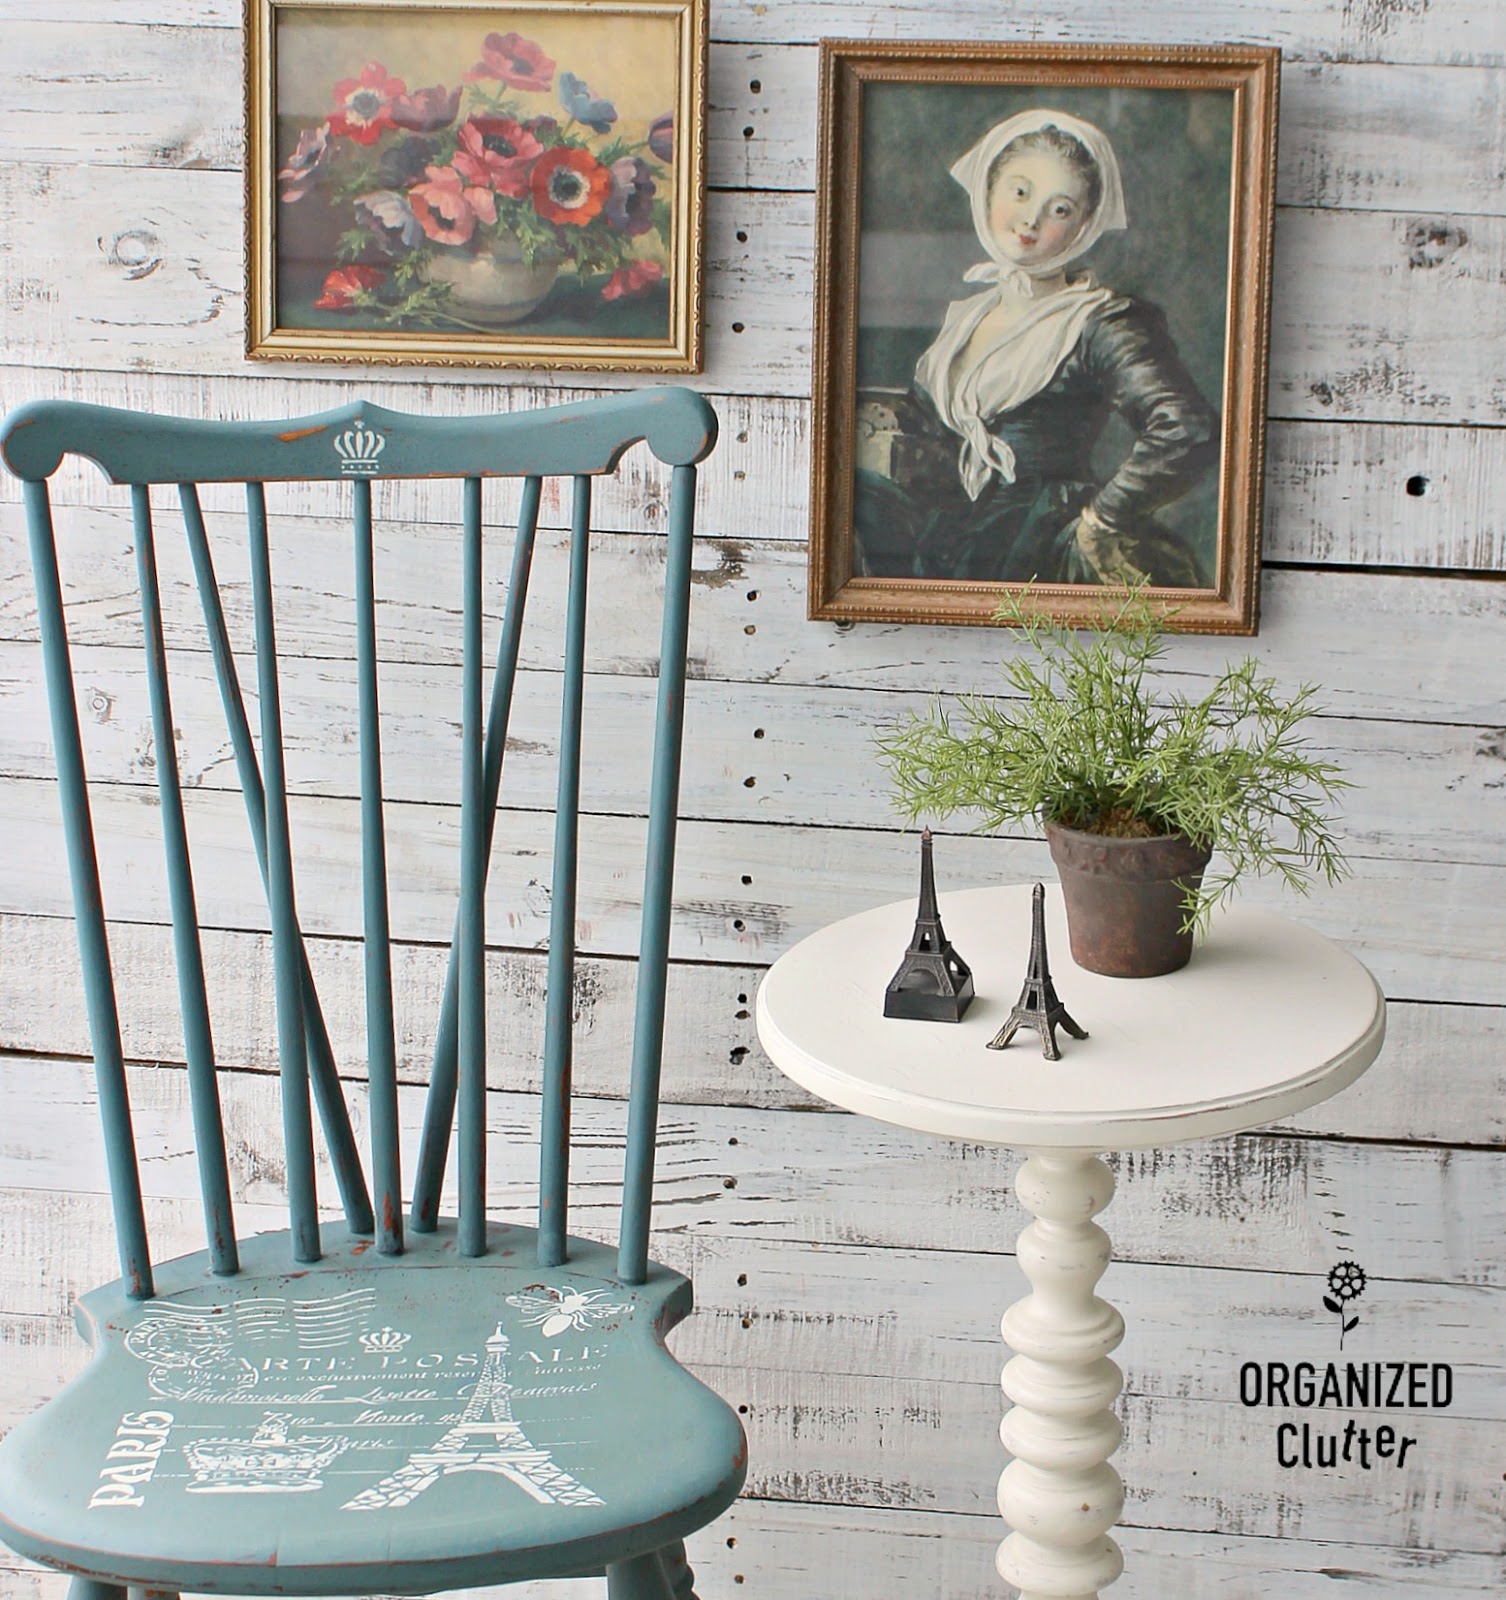 Easy Repurposed Antique Chair Spindle Wind Chimes - Interior Frugalista